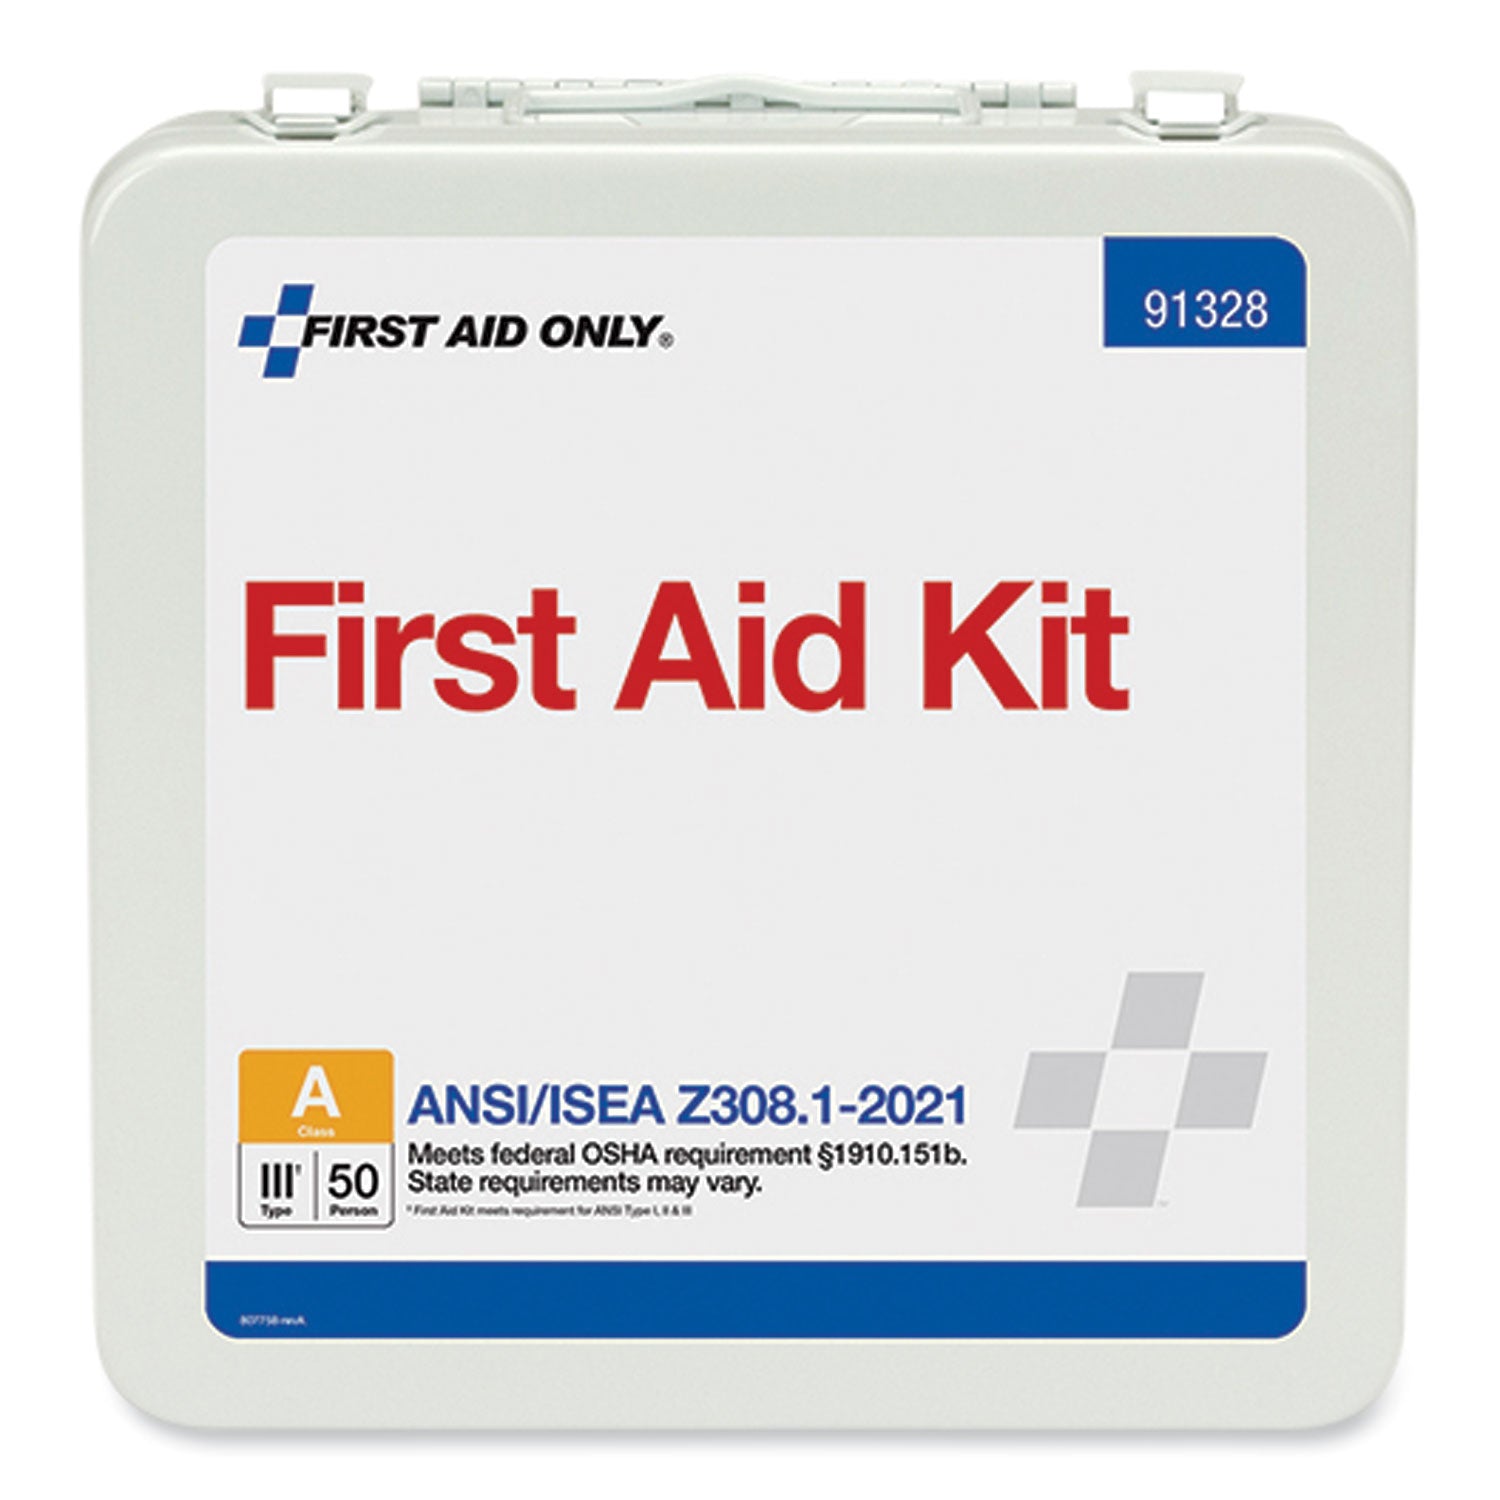 ansi-2021-type-iii-first-aid-kit-for-50-people-184-pieces-metal-case_fao91328 - 1